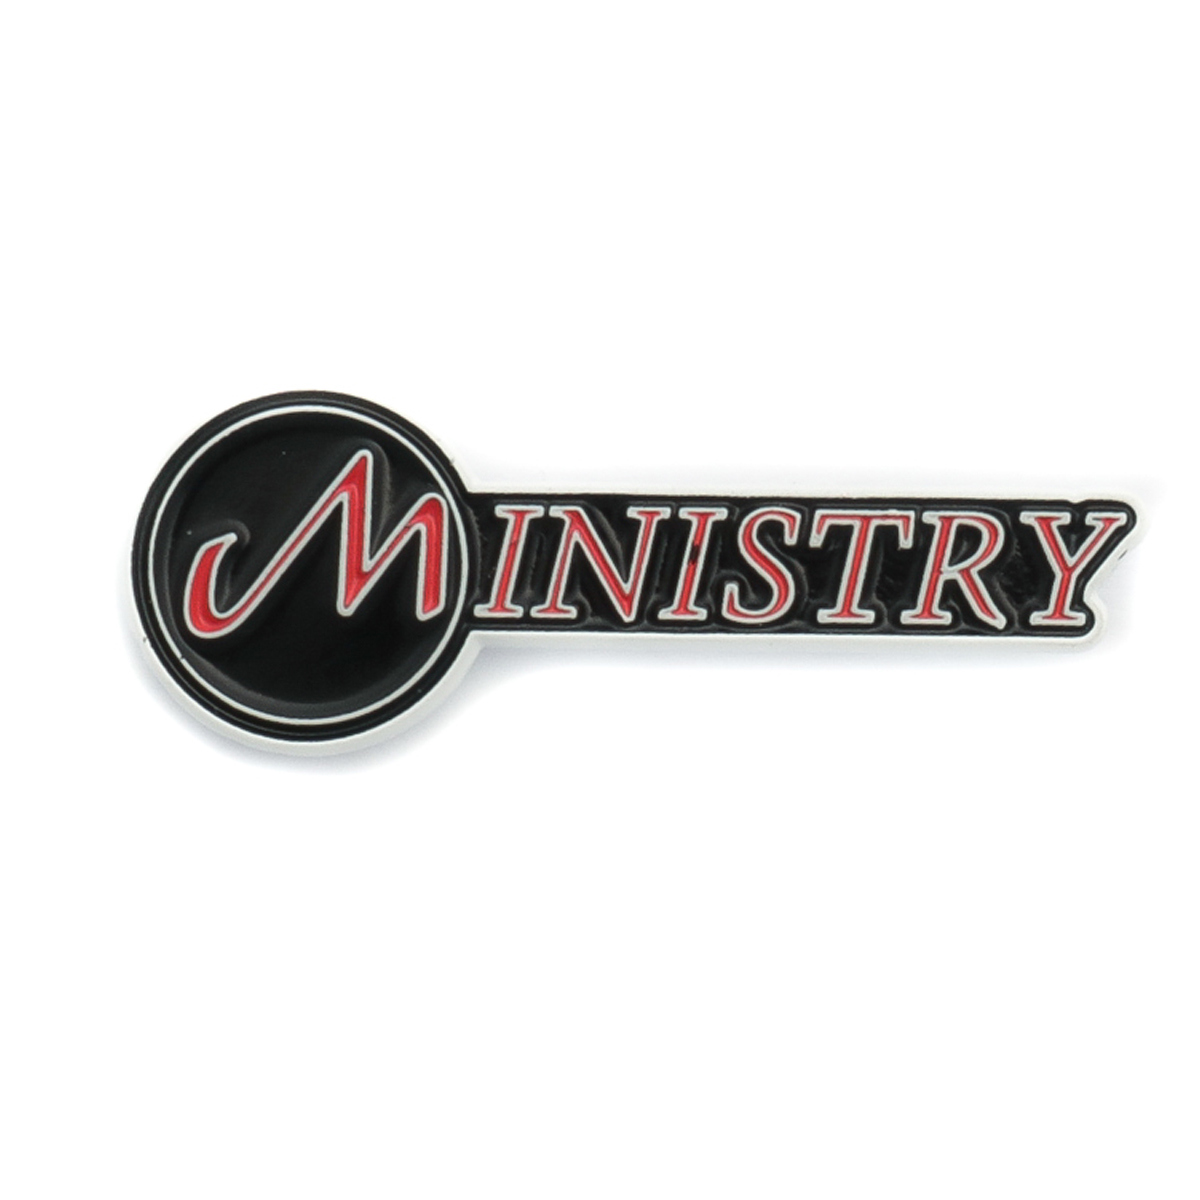 With Sympathy and Twitch merch available and shipping now in the Ministry store, get yours today. ministryofficial.store